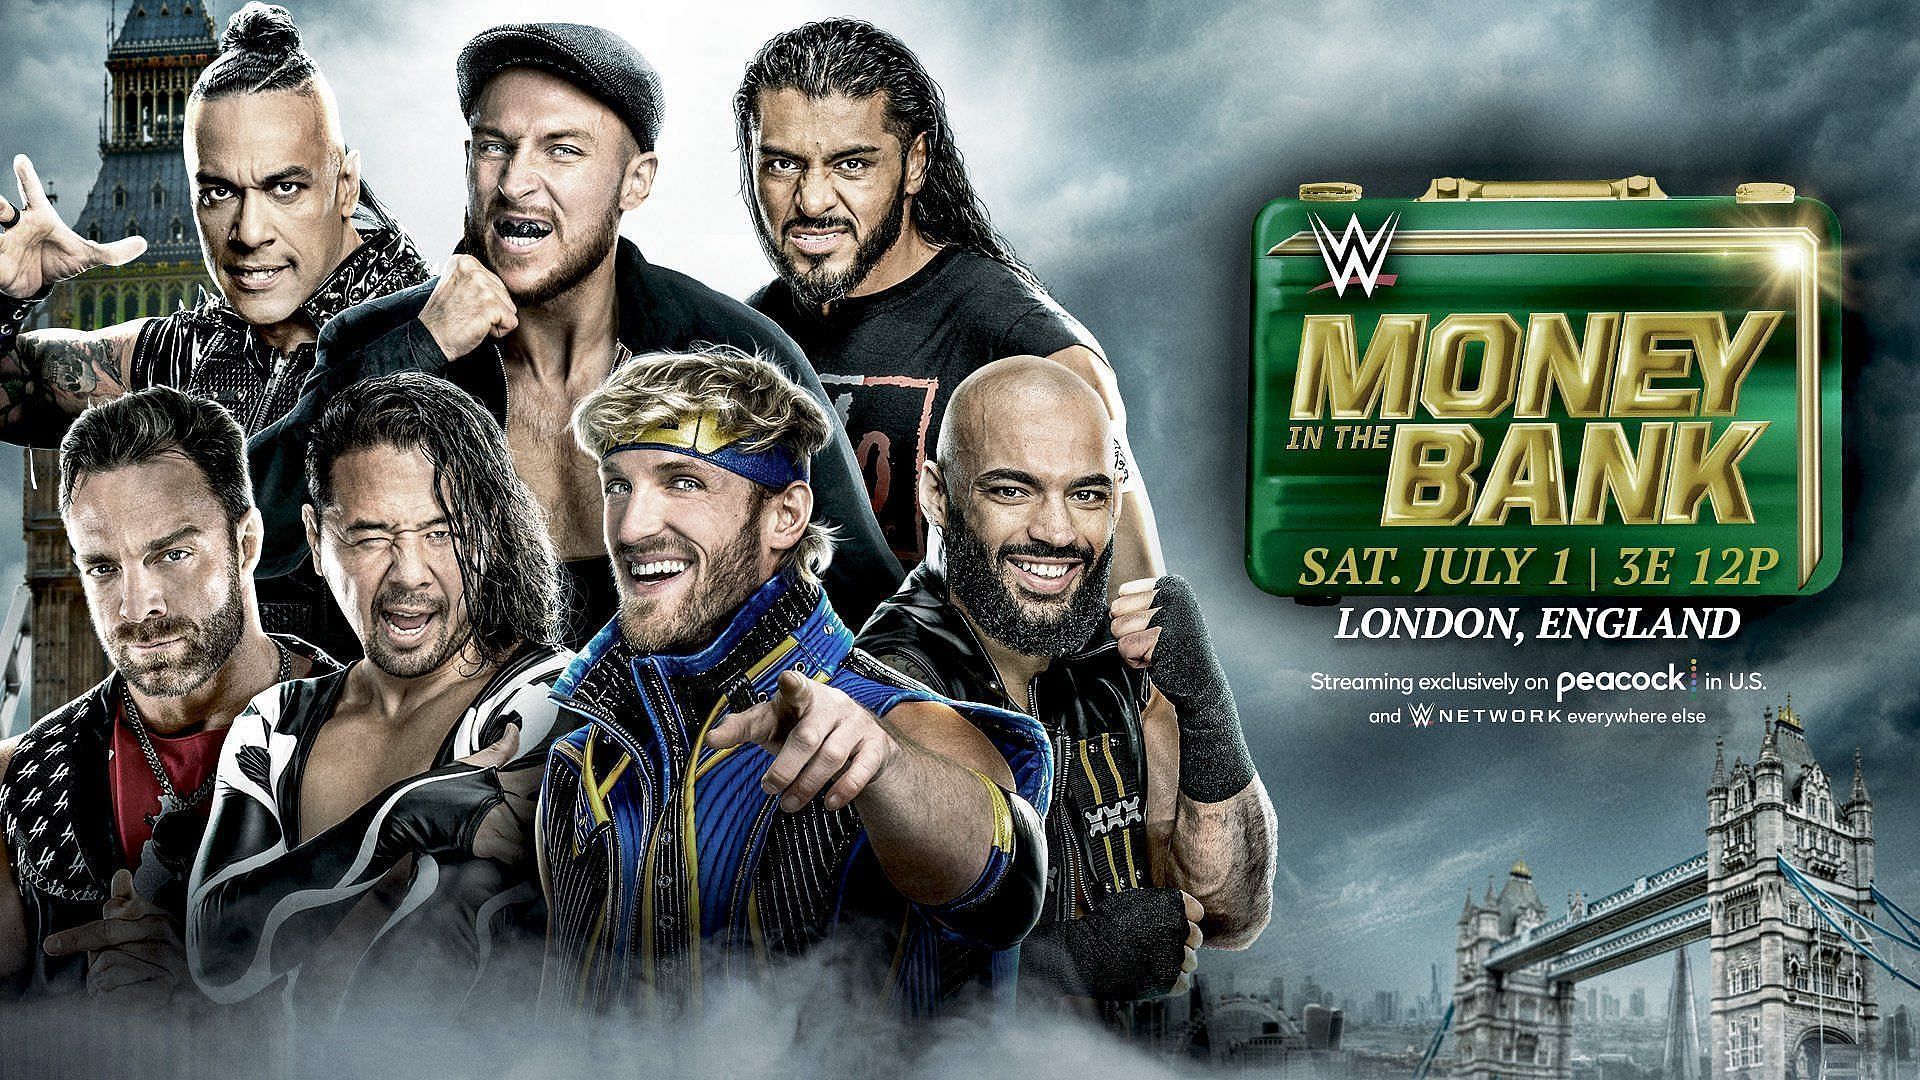 Money in the Bank 2023 will take place on July 1st